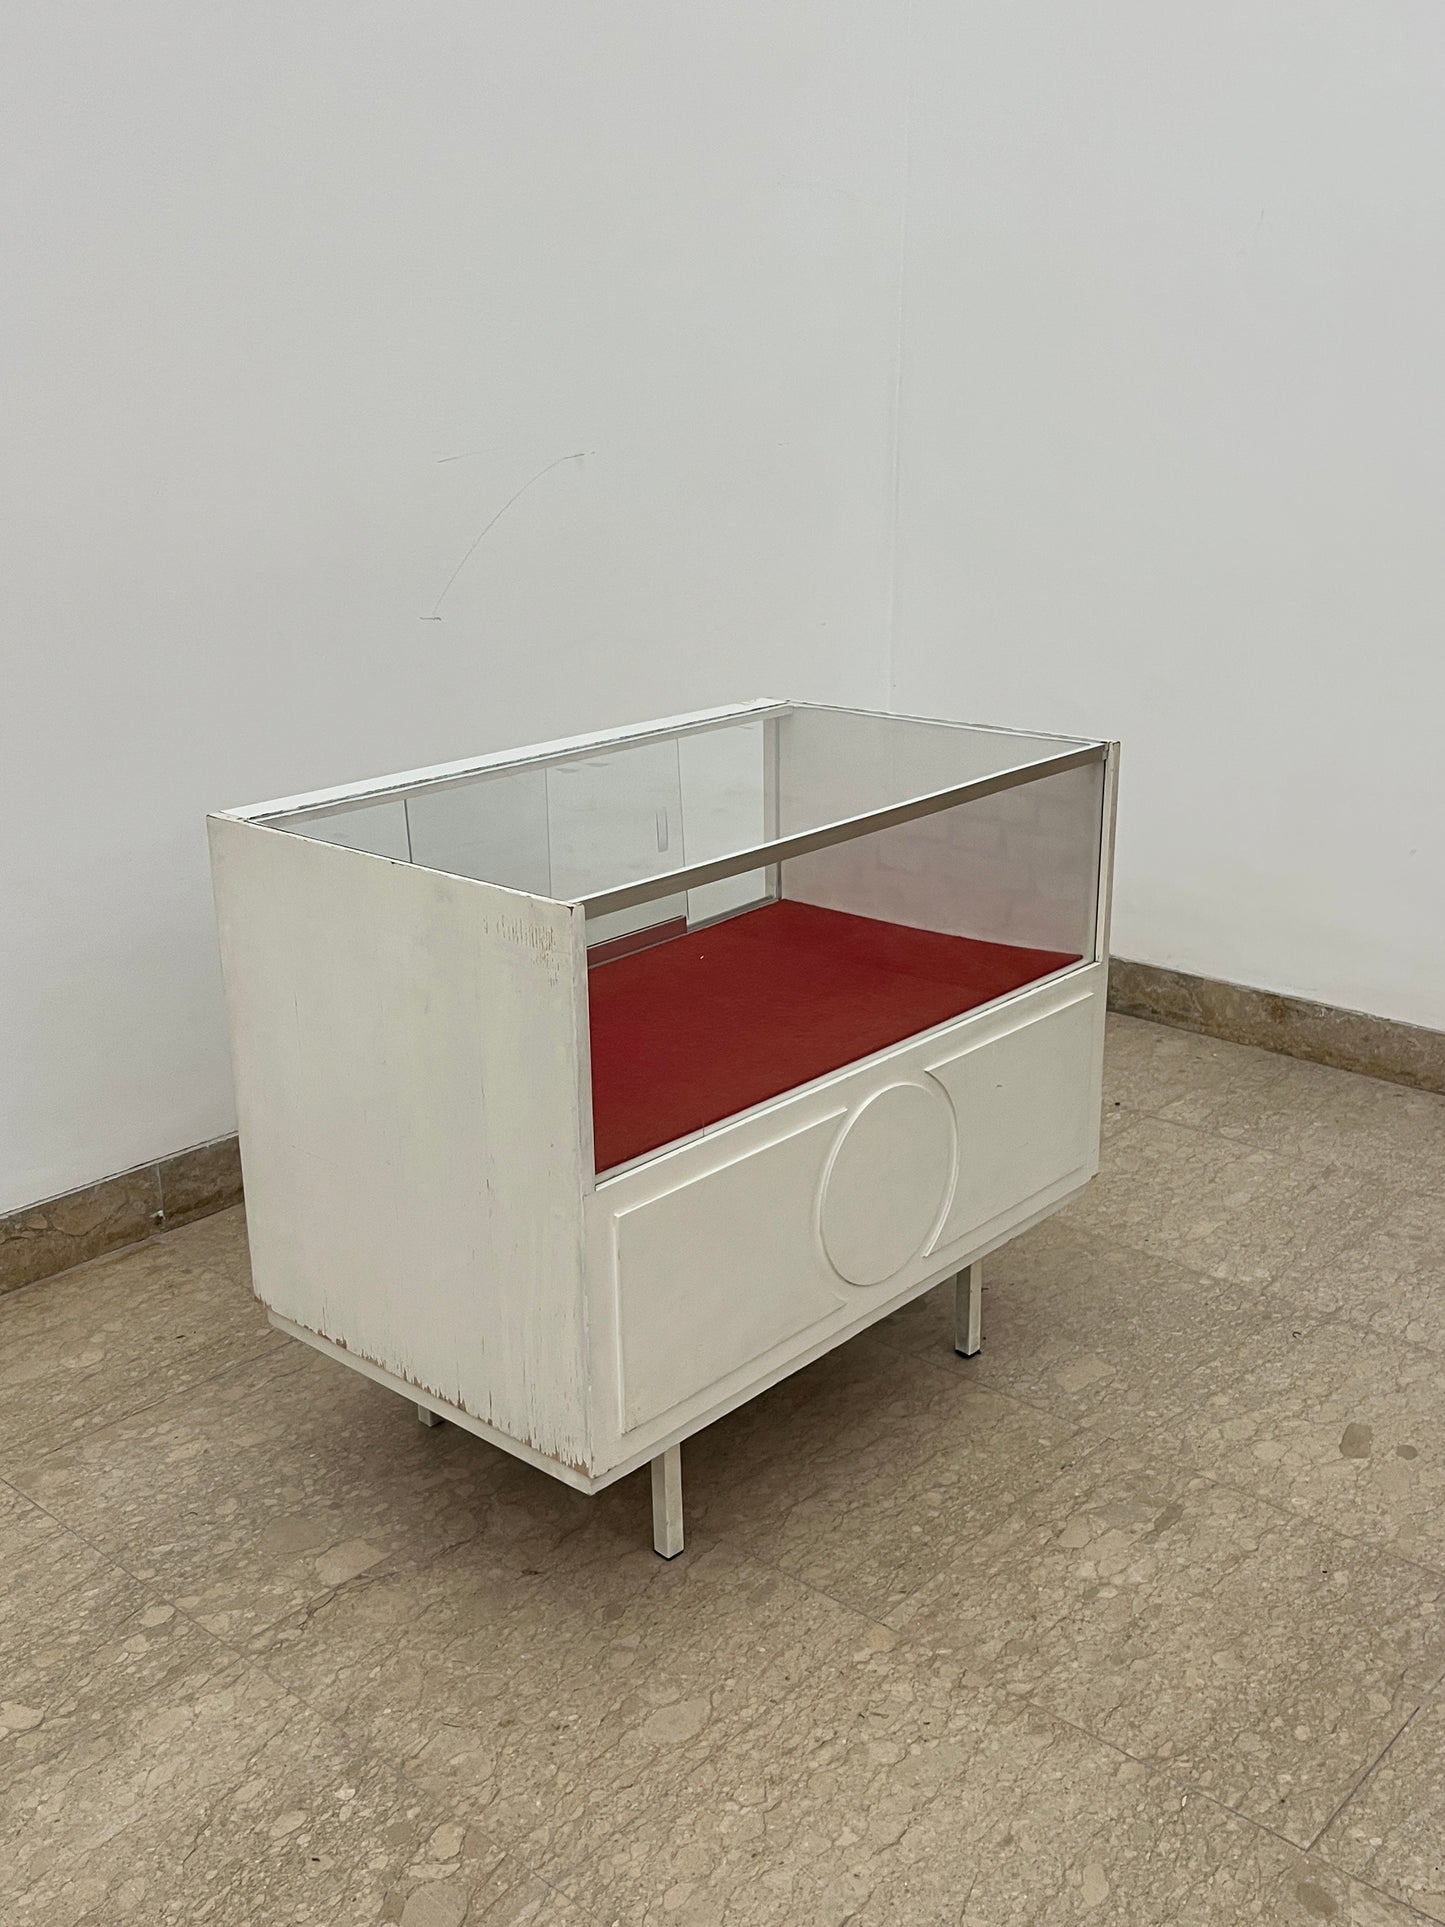 RESERVED │ Austrian Pavilion │ Diaper changing table, 2.2.4